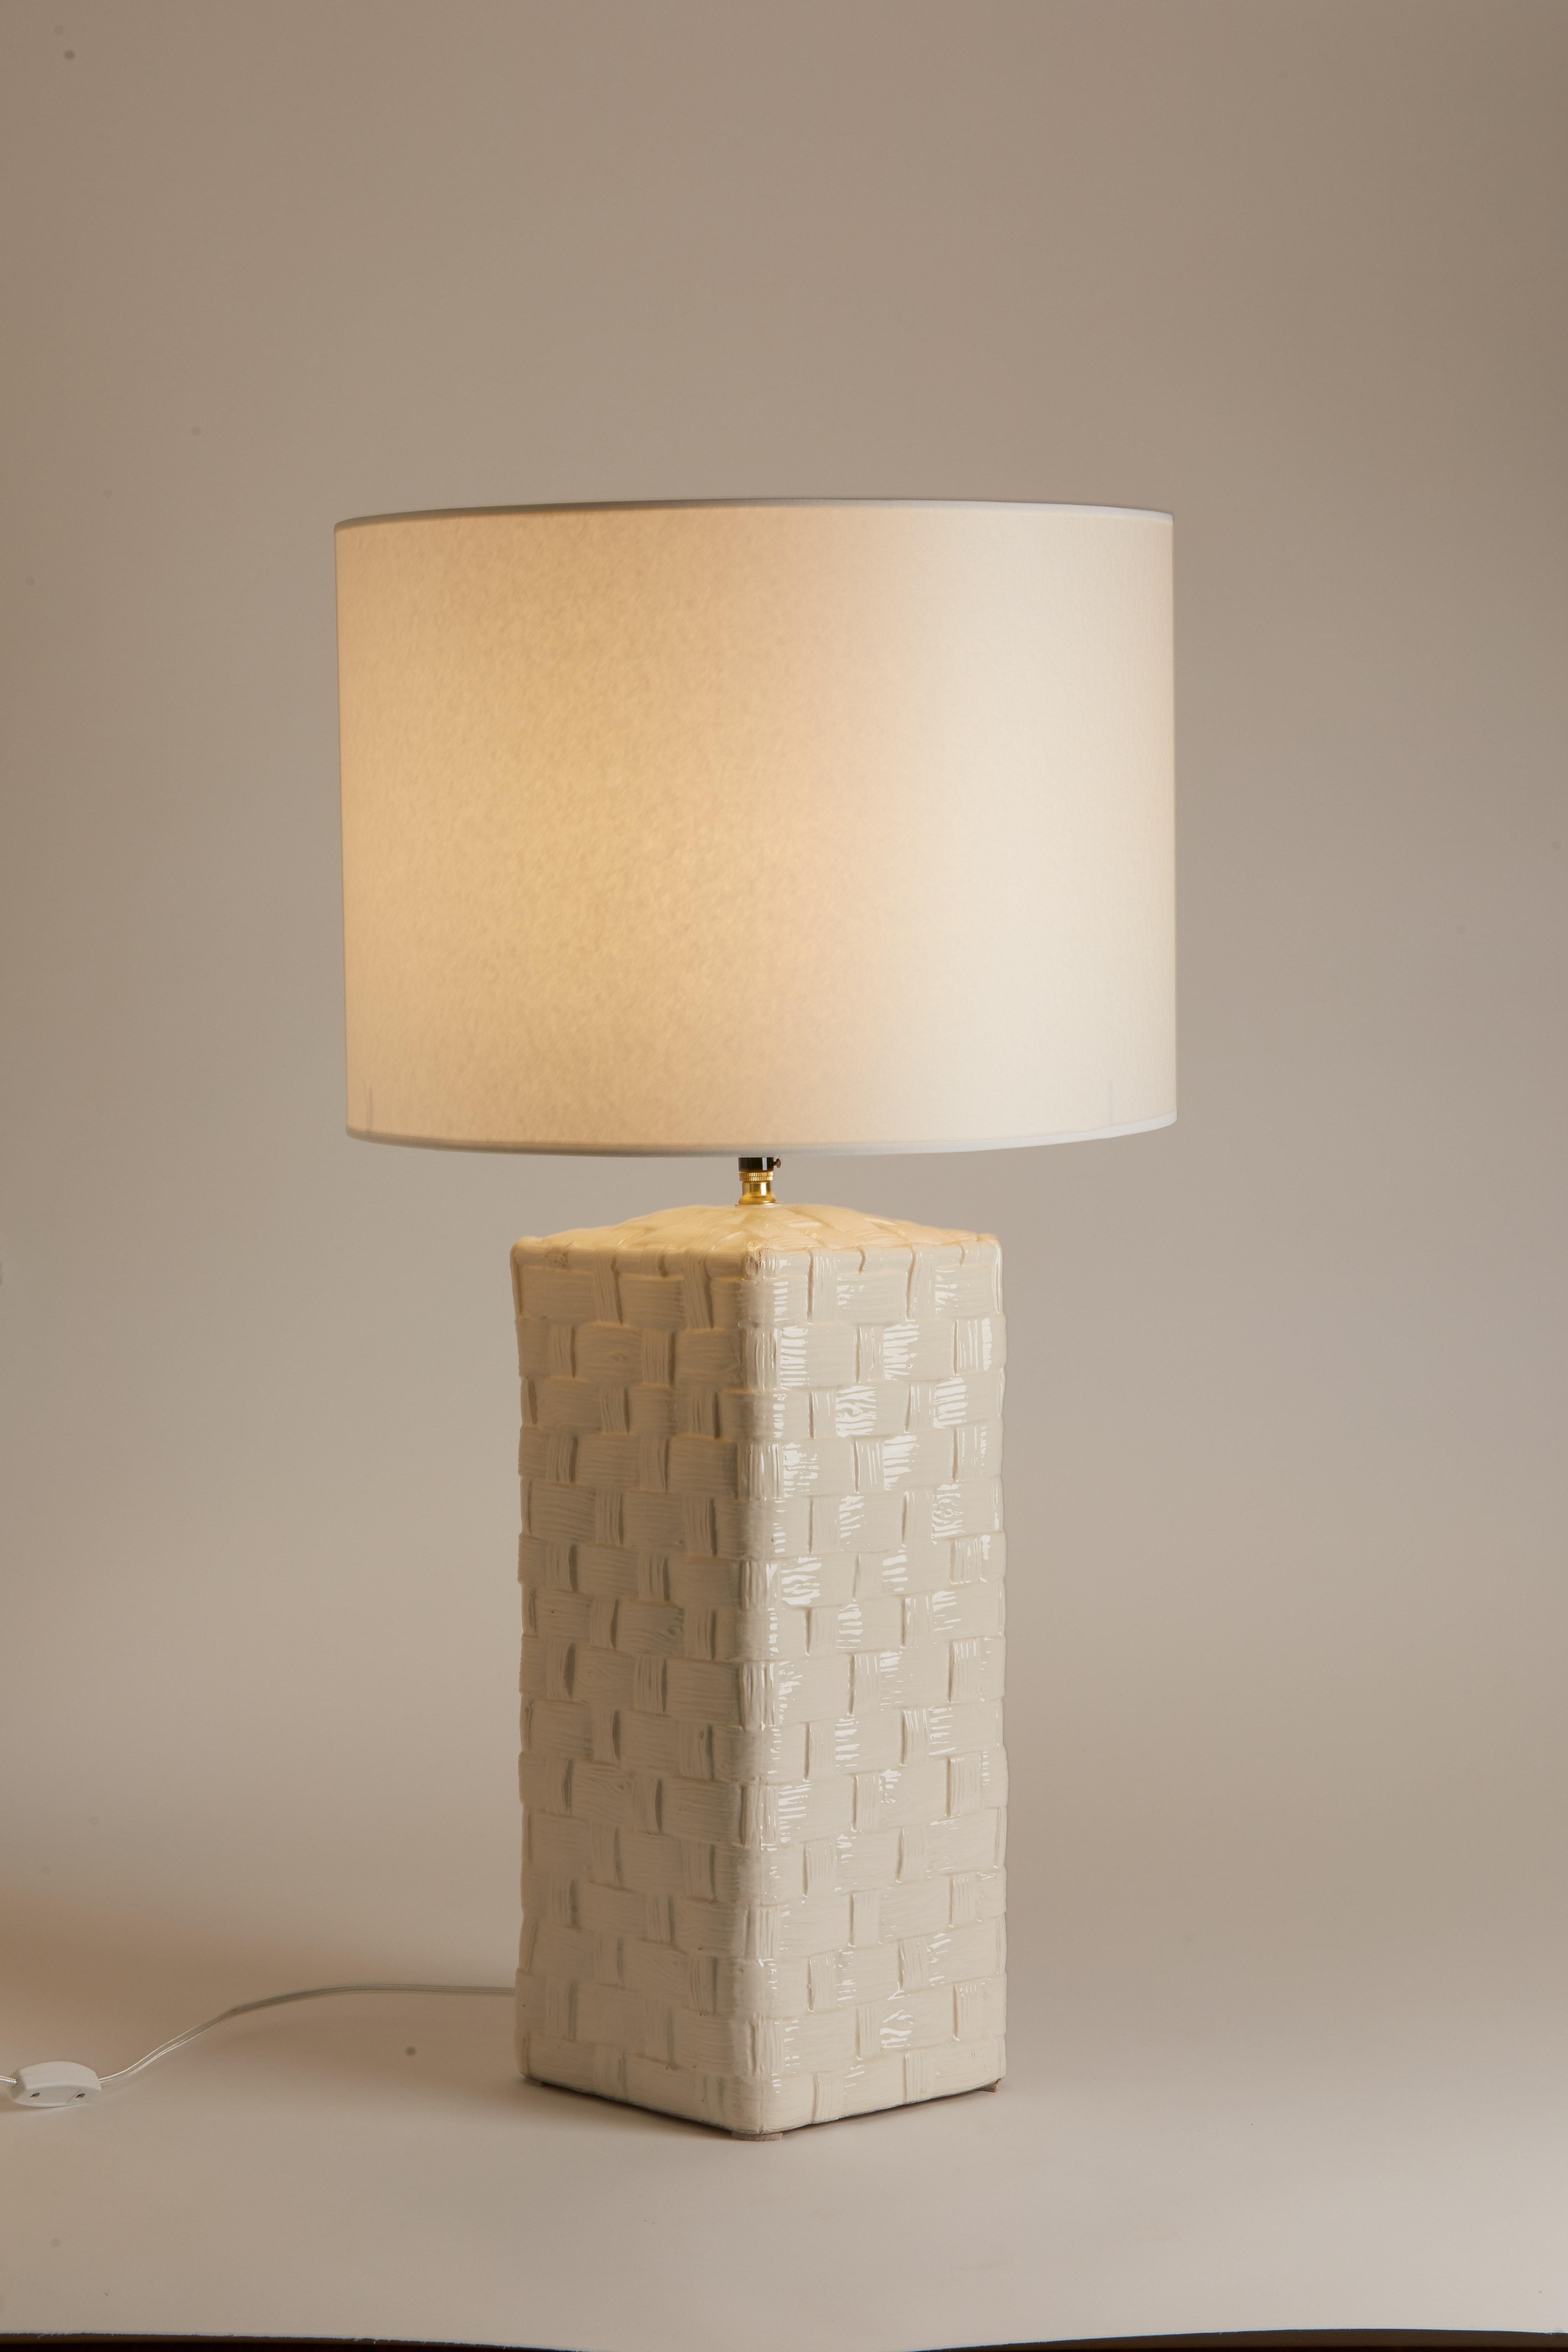 1970s French table lamp
White Ceramic Faux Basket Weave Rectangle Base.